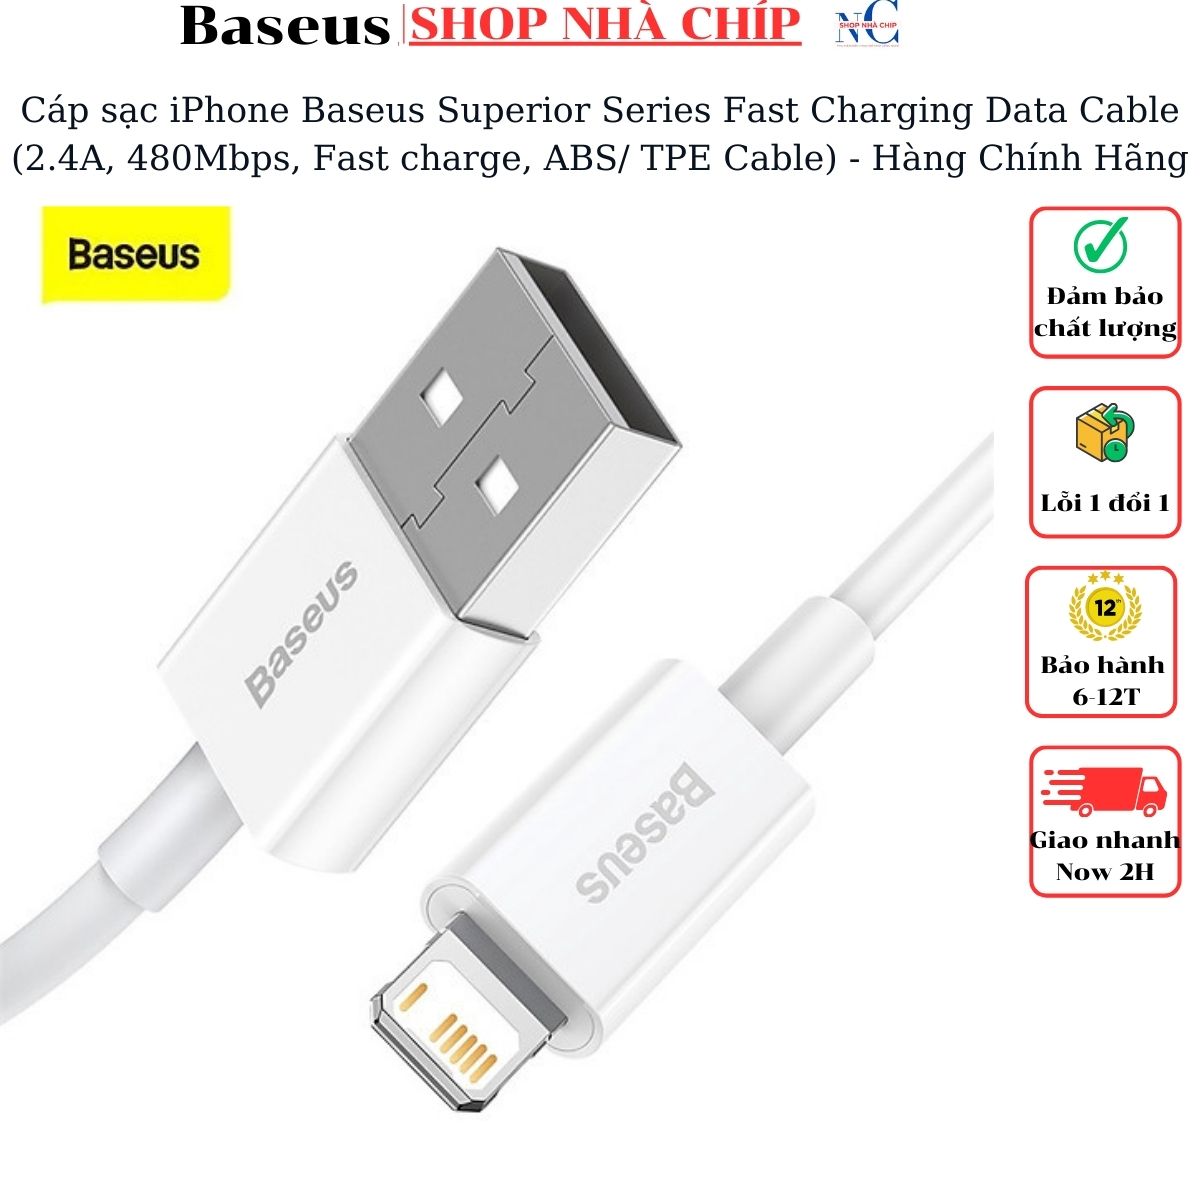 Cáp sạc iPhone Baseus Superior Series Fast Charging Data Cable (2.4A, 480Mbps, Fast charge, ABS/ TPE Cable) - Hàng Chính Hãng 